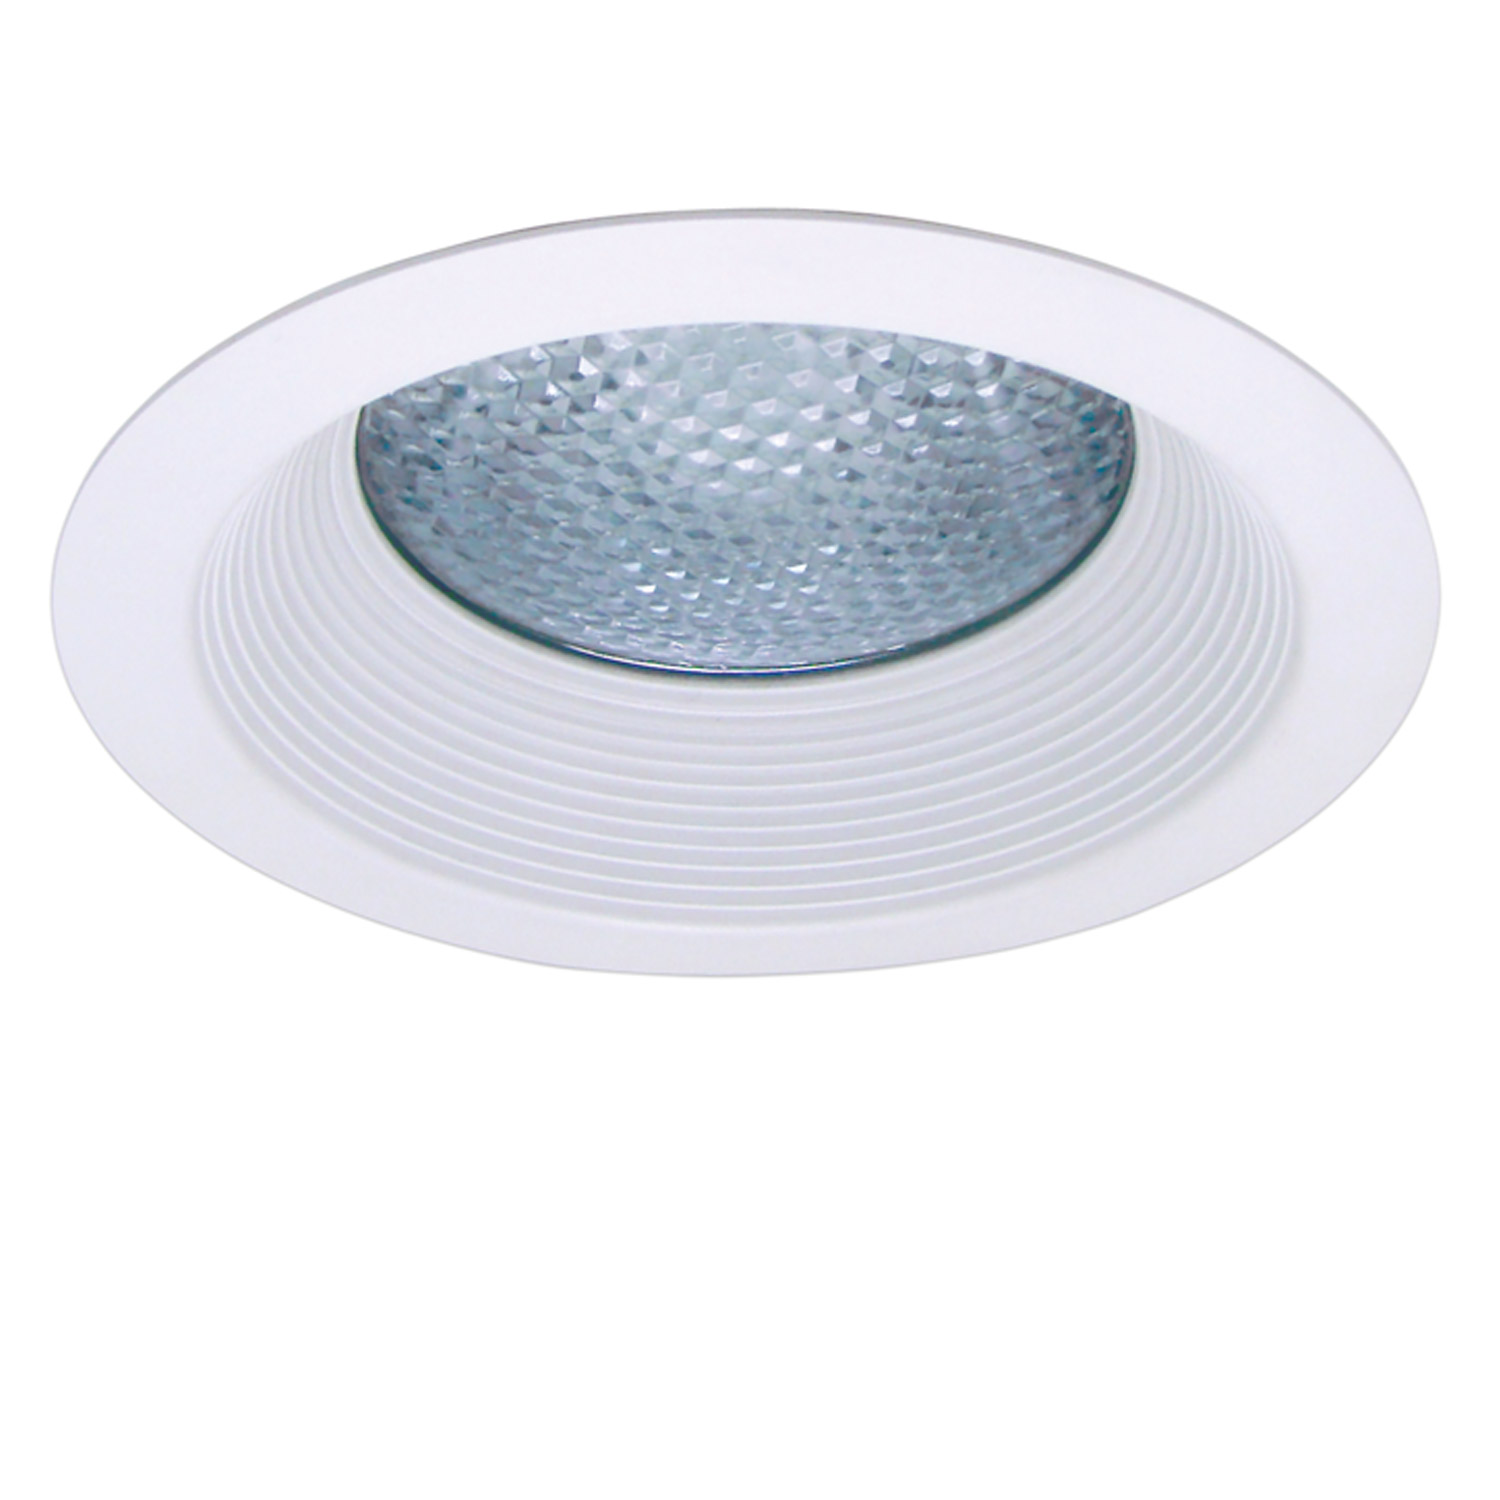 Product image for Two Piece Reflector with Lower Baffle with Prismatic Convex Lens for 4-Inch BIOS LED Downlights